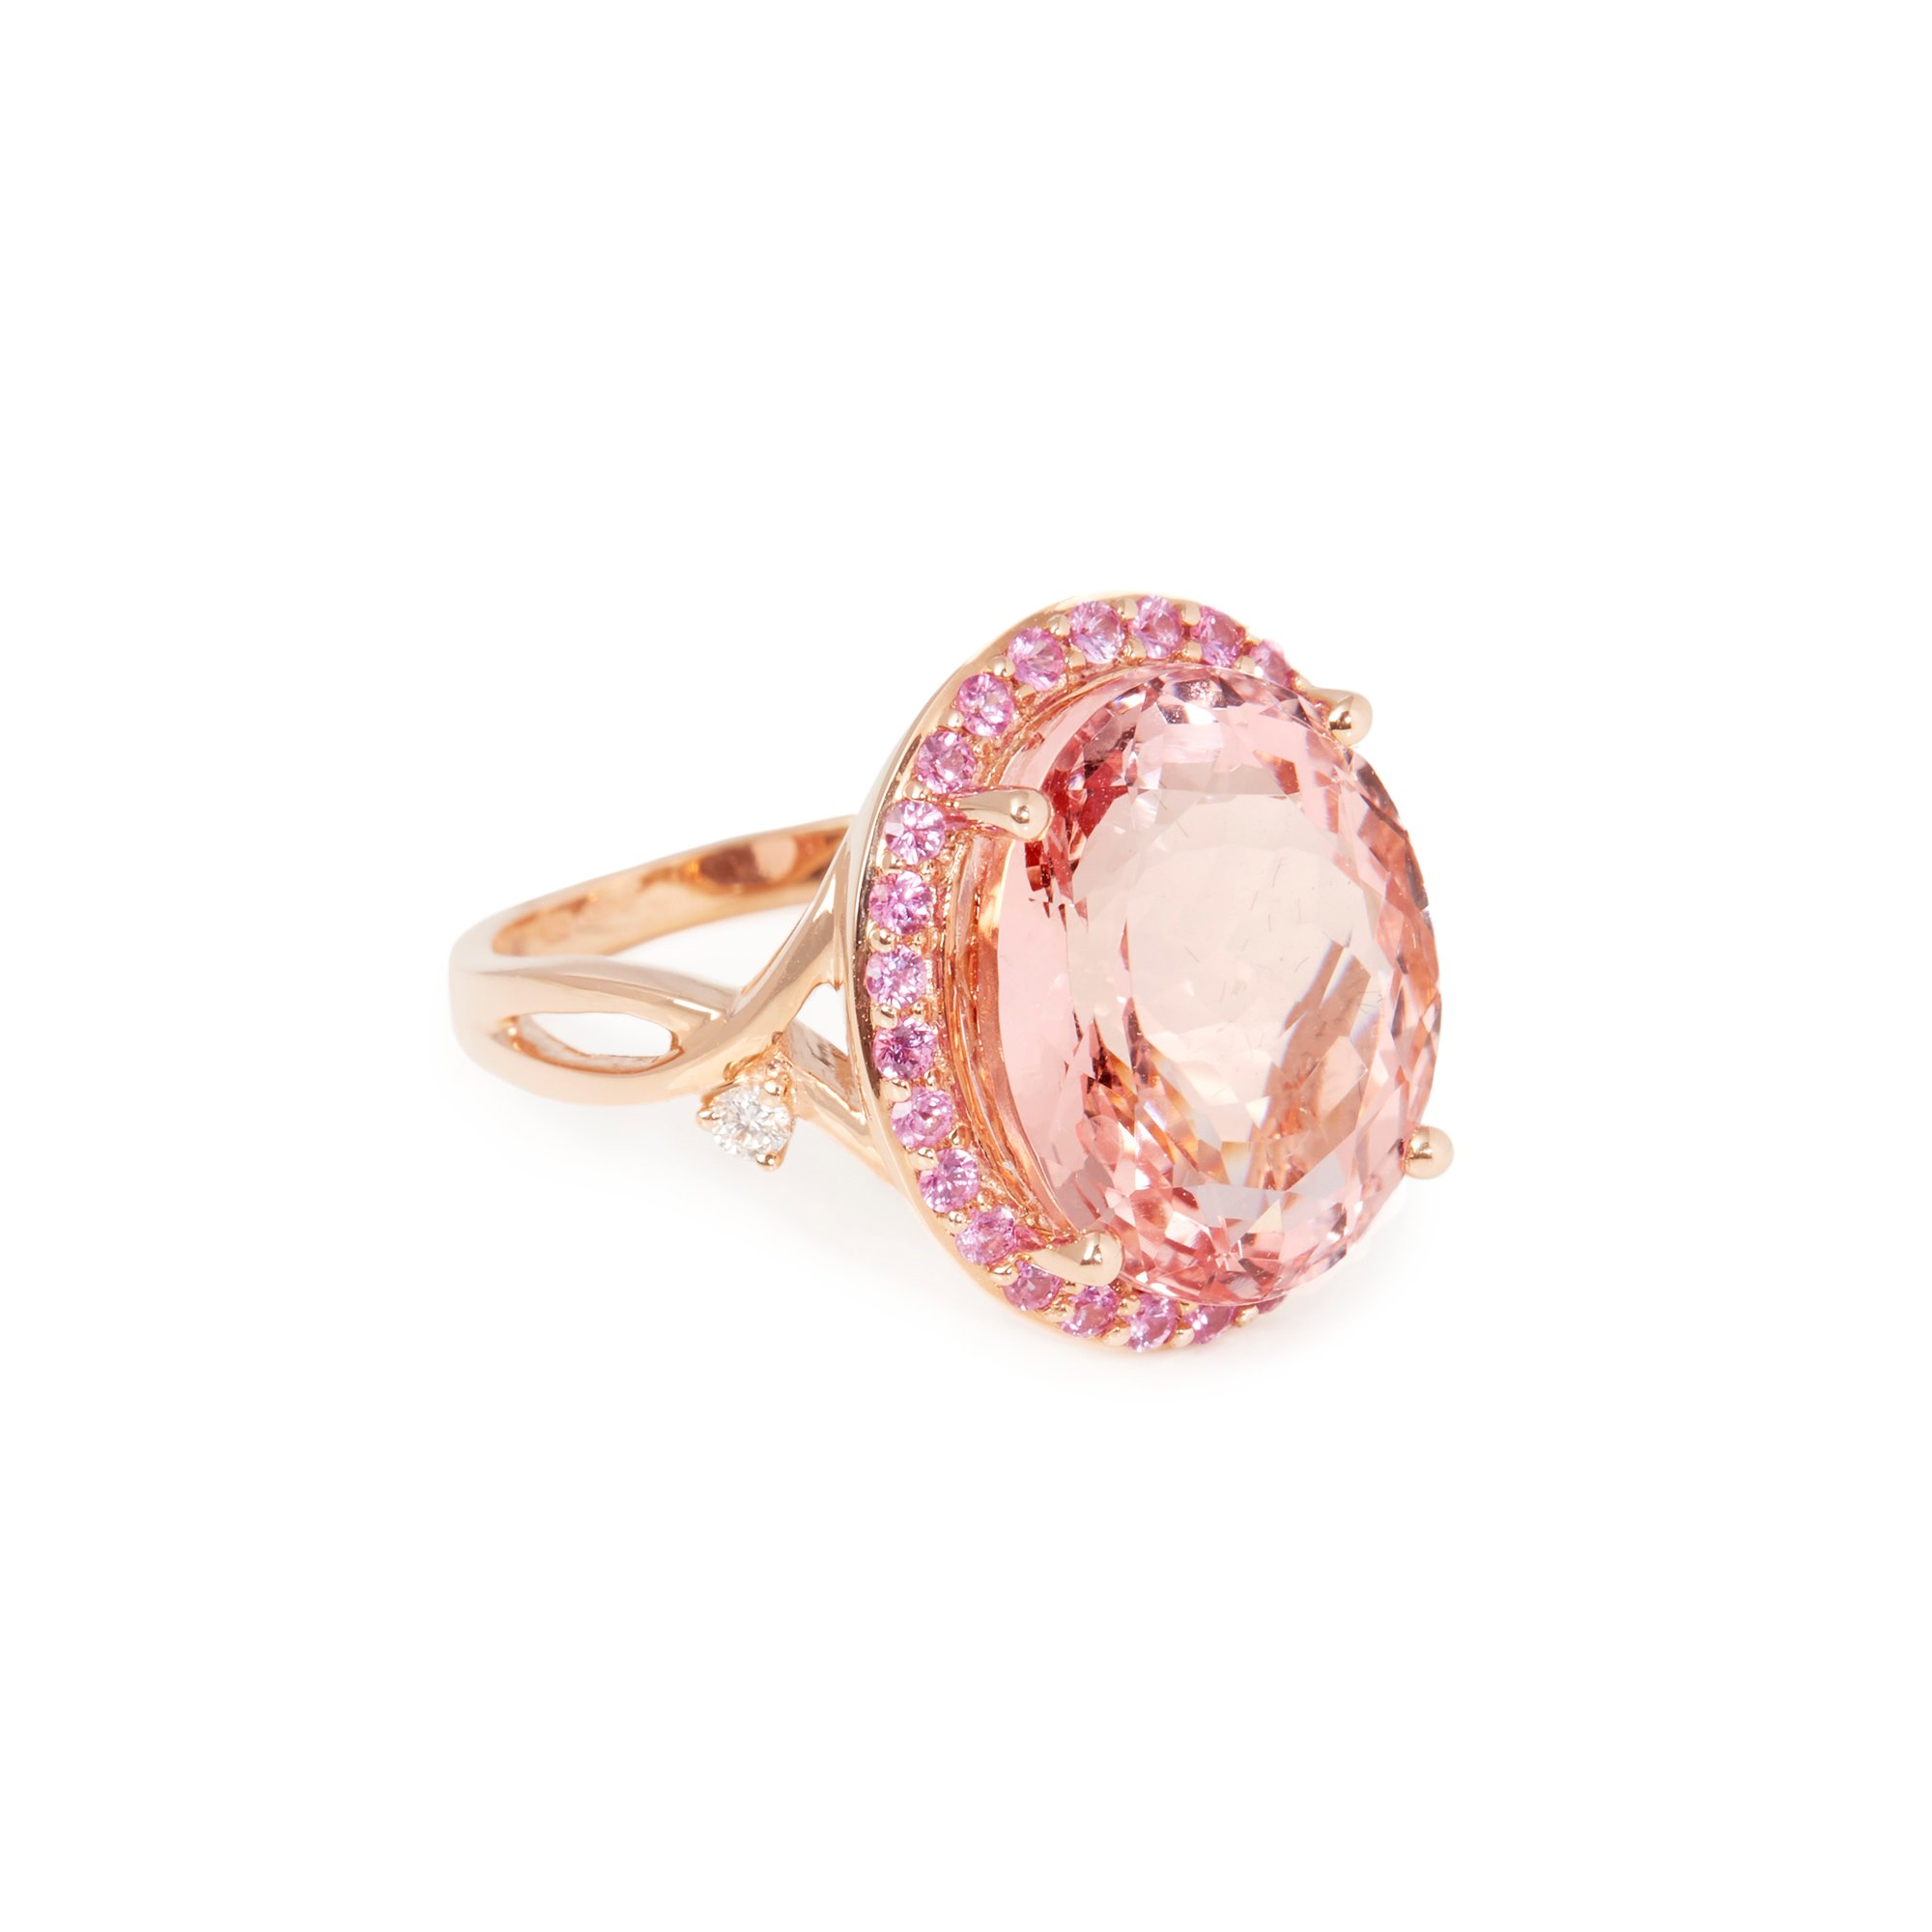 David Jerome Certified 12.51ct Untreated Brazilian Oval Cut Morganite, Pink Sapphire and Diamond 18ct gold Ring